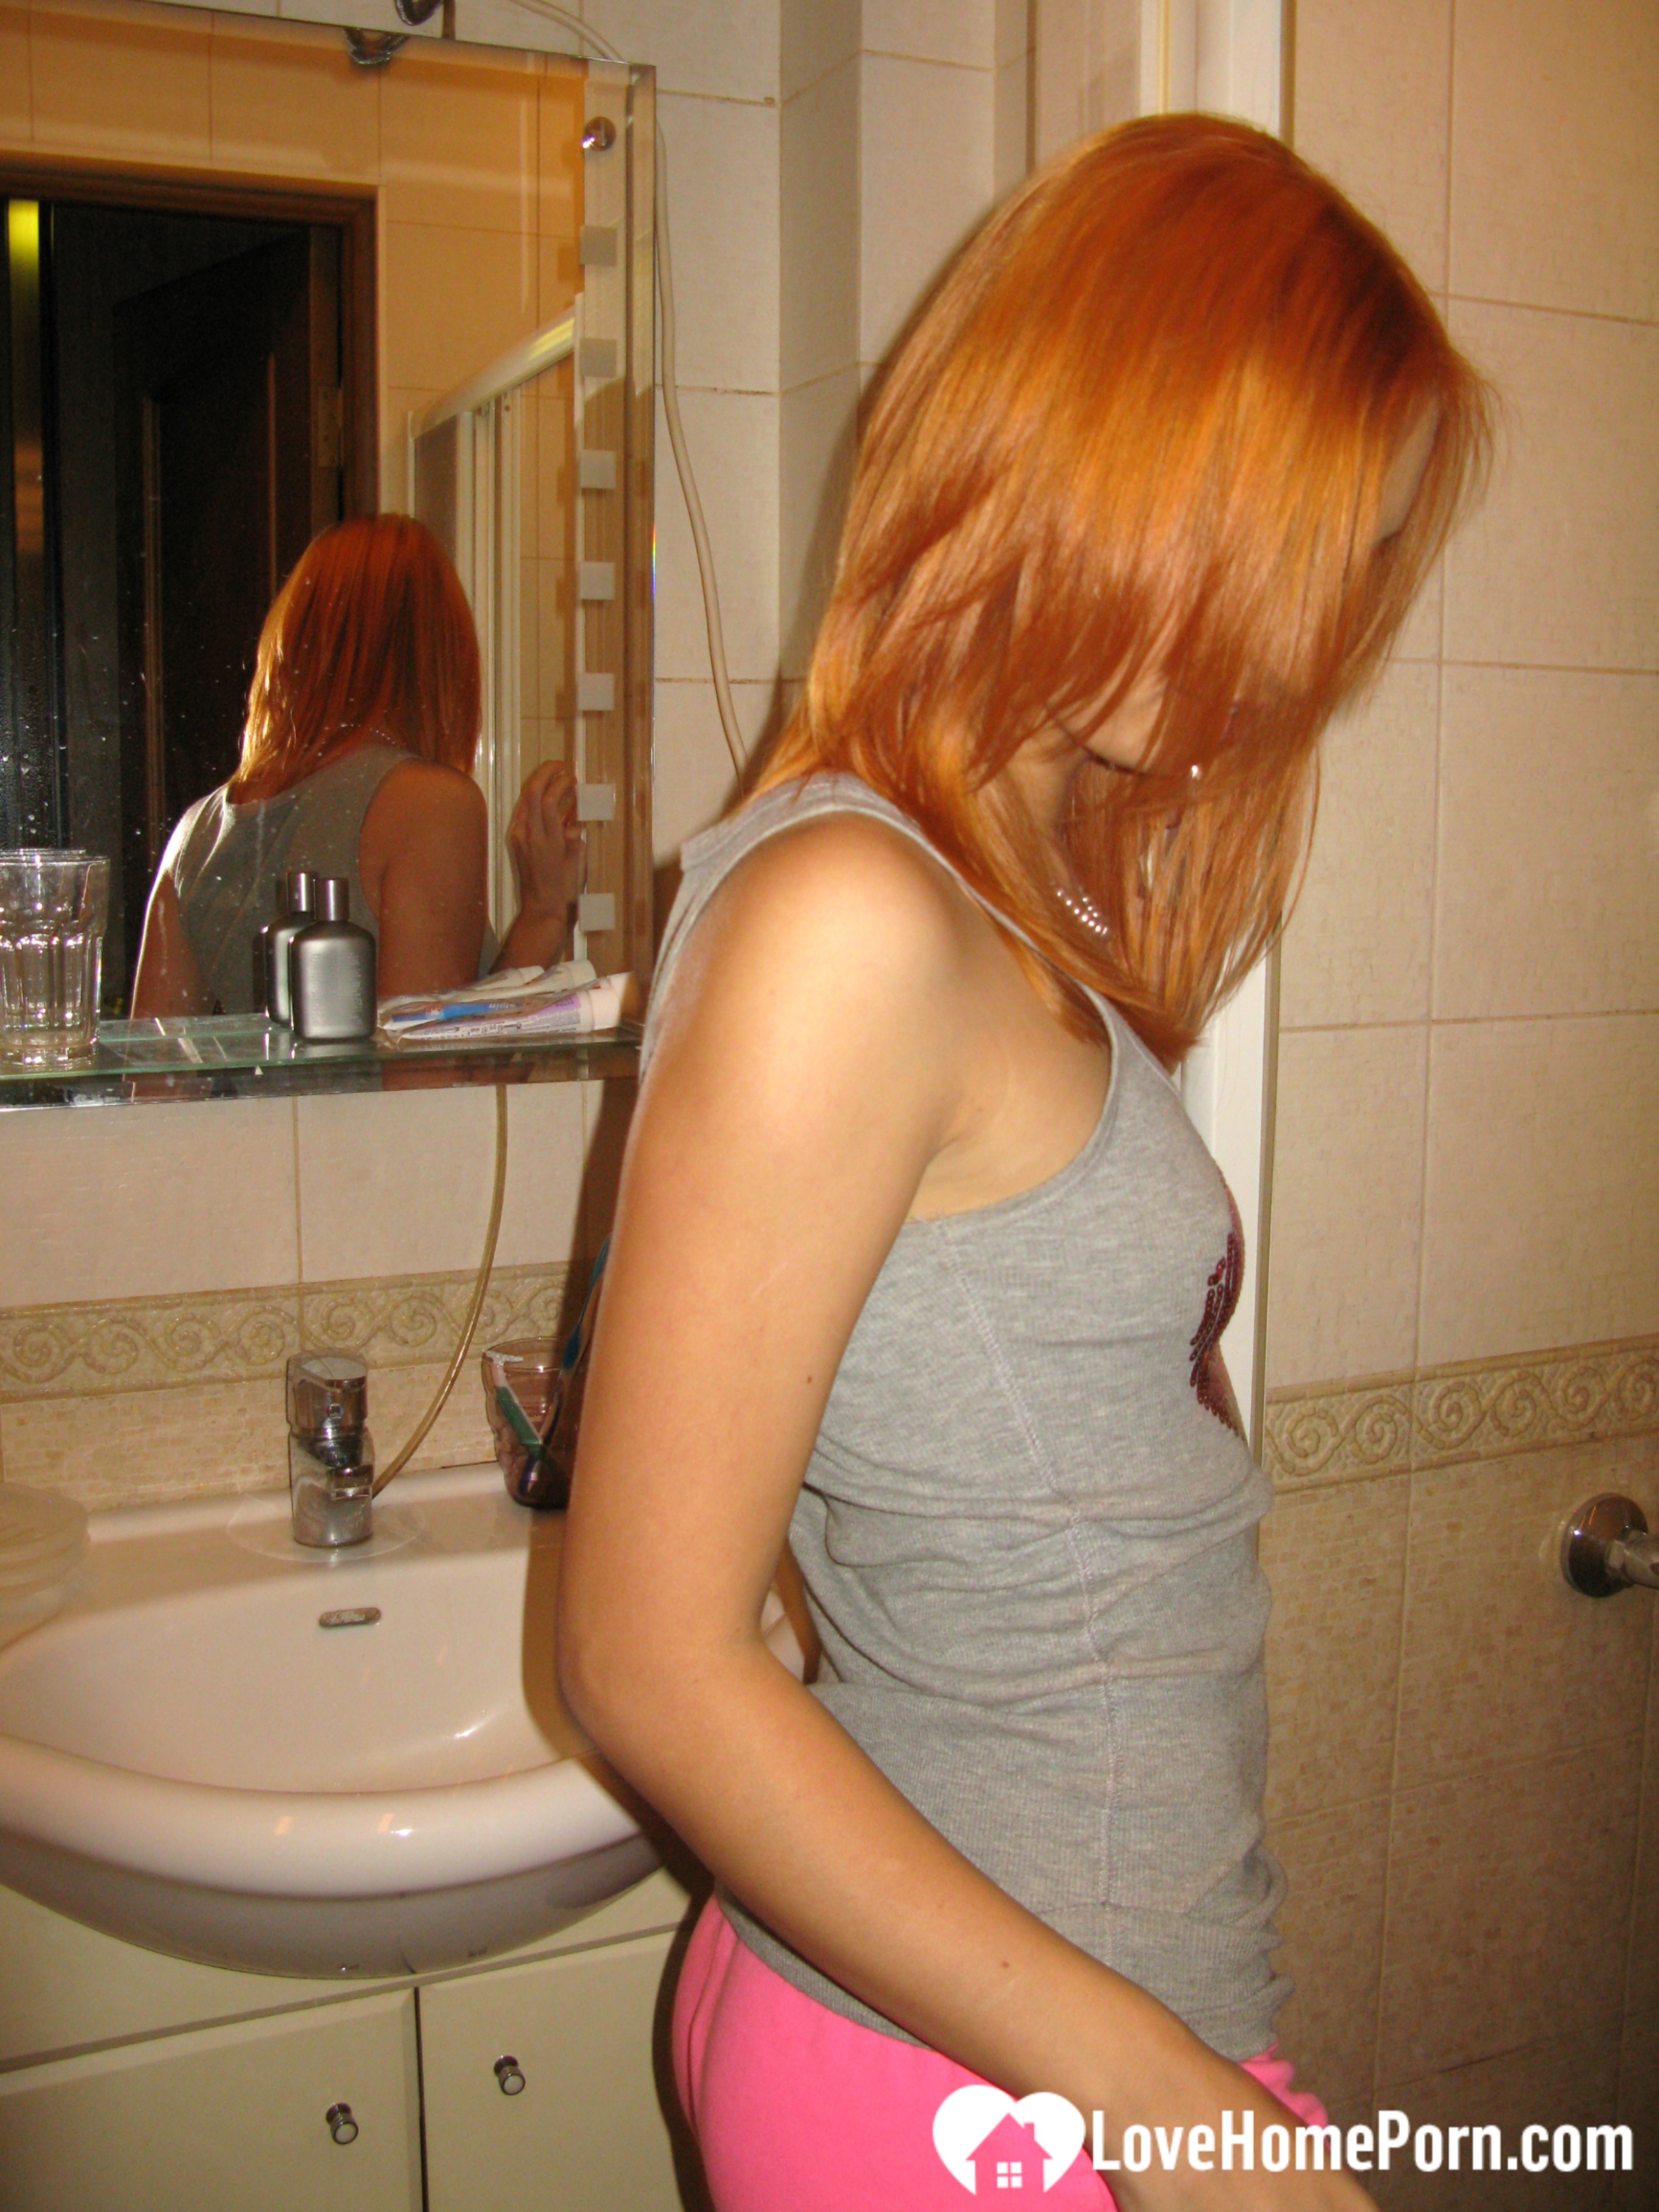 Redhead taking some hot selfies before showering